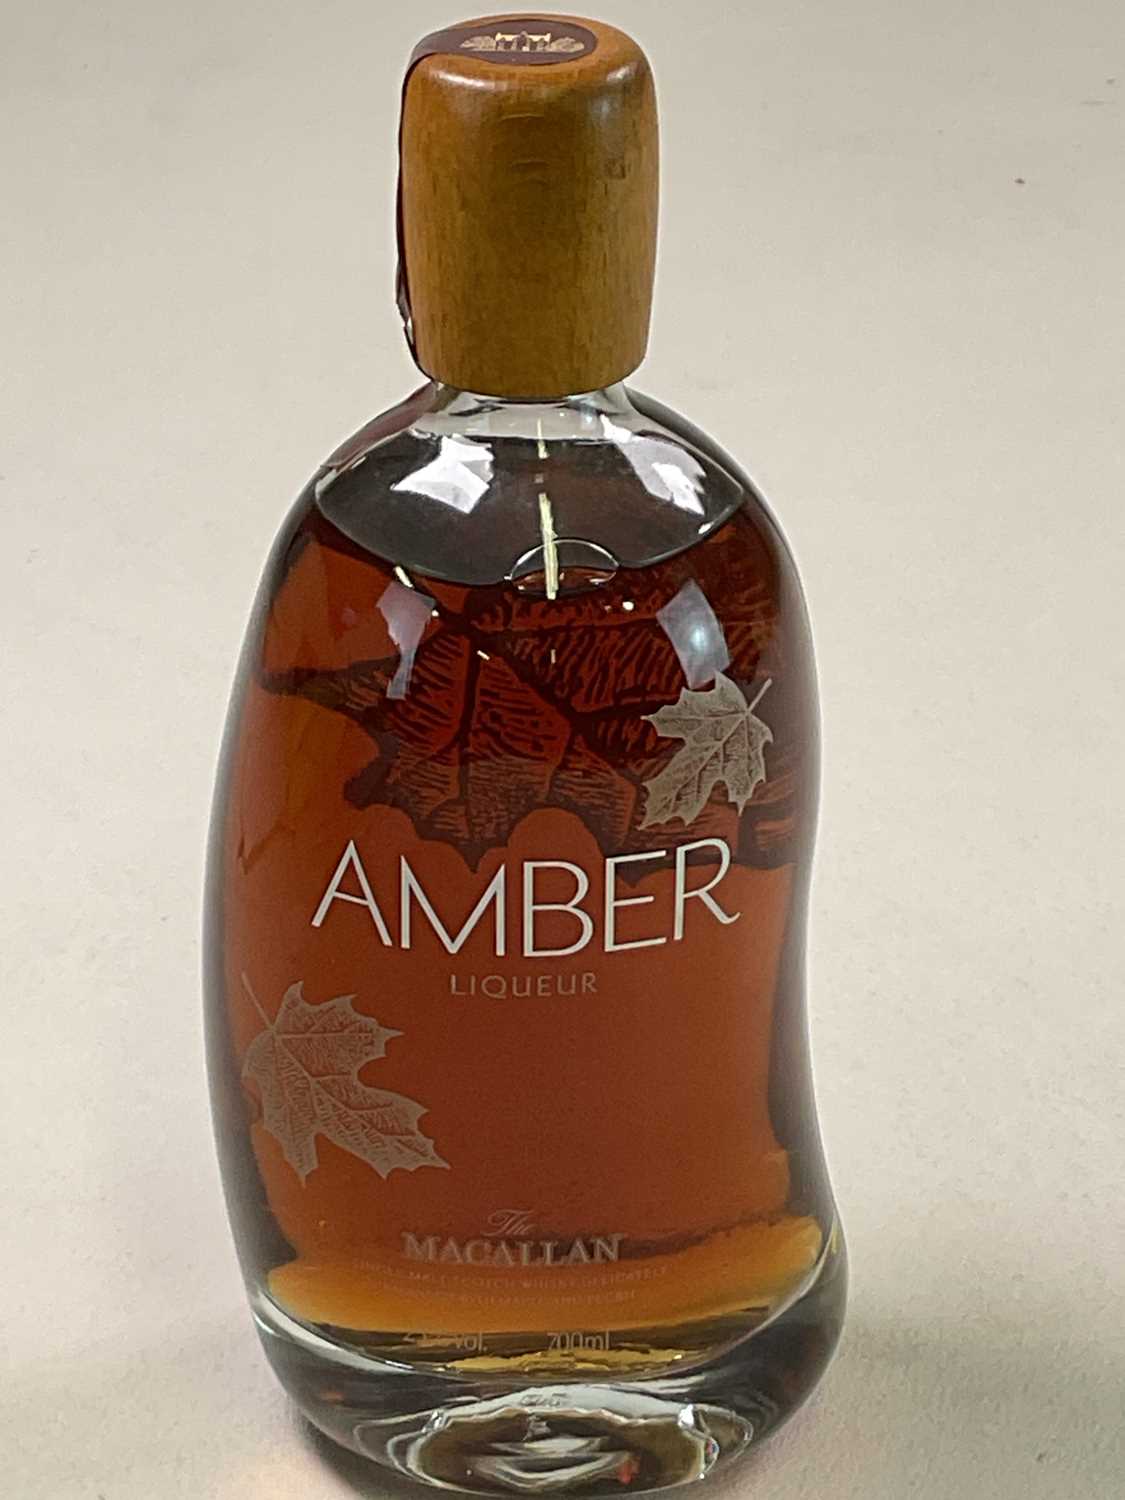 LIQUEUR; a bottle of The Macallan Amber liqueur, Single Malt Scotch whisky balanced with maple and